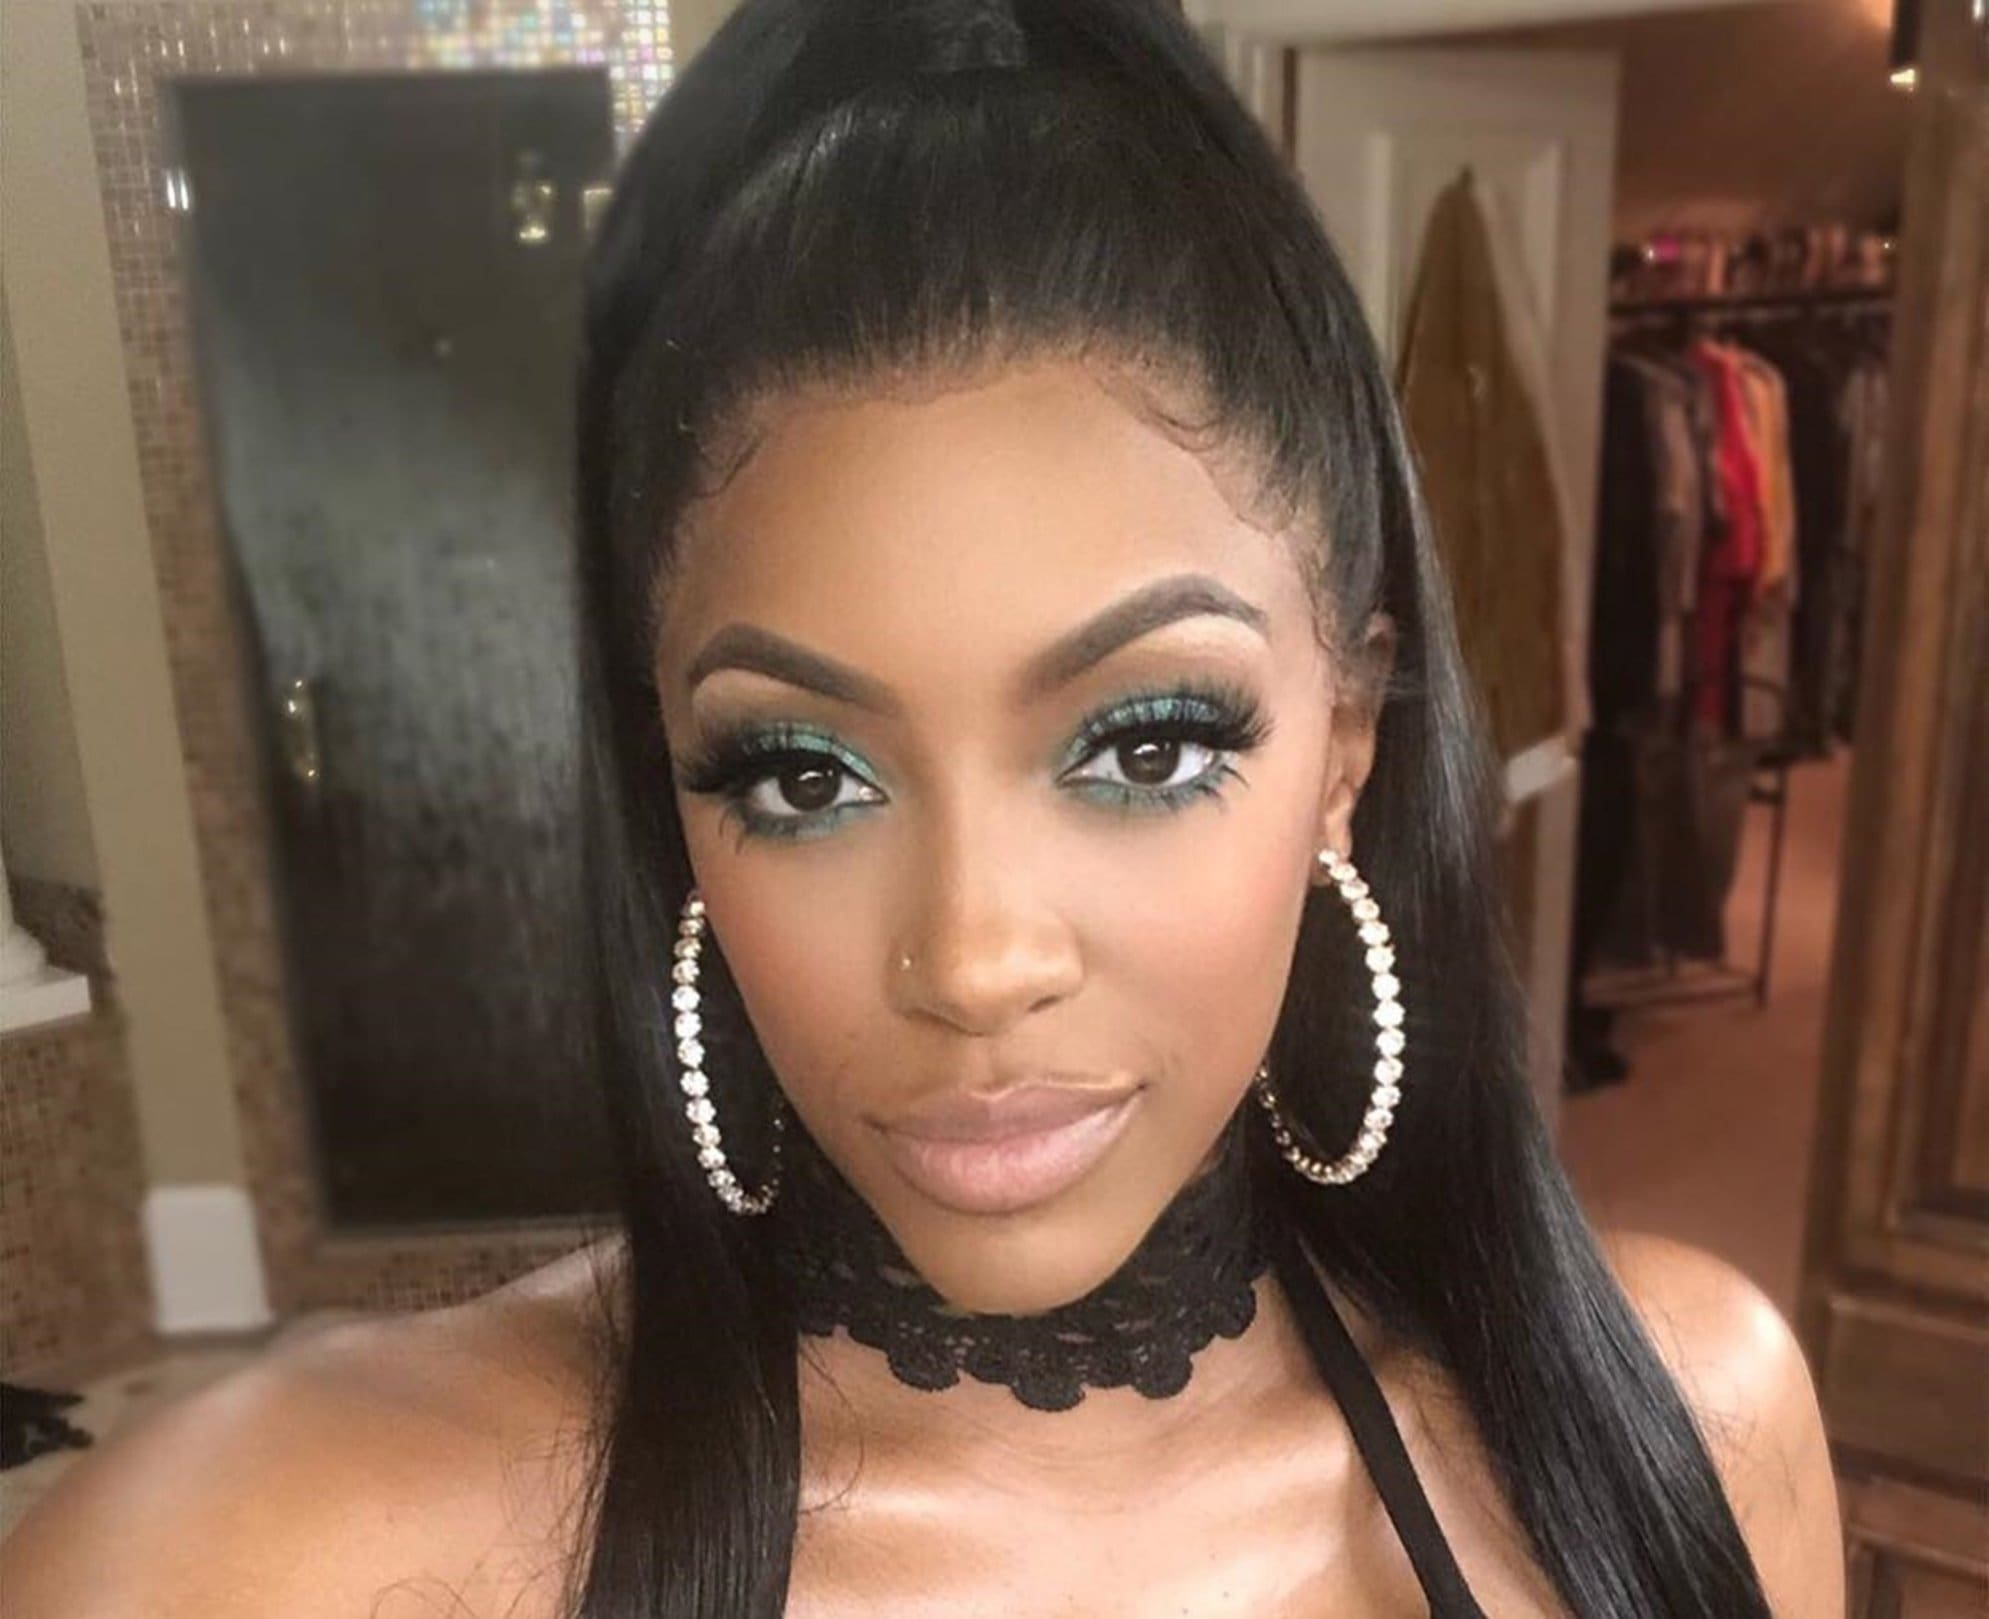 Porsha Williams' Latest Message Has Fans Saying She Blessed Their Timeline